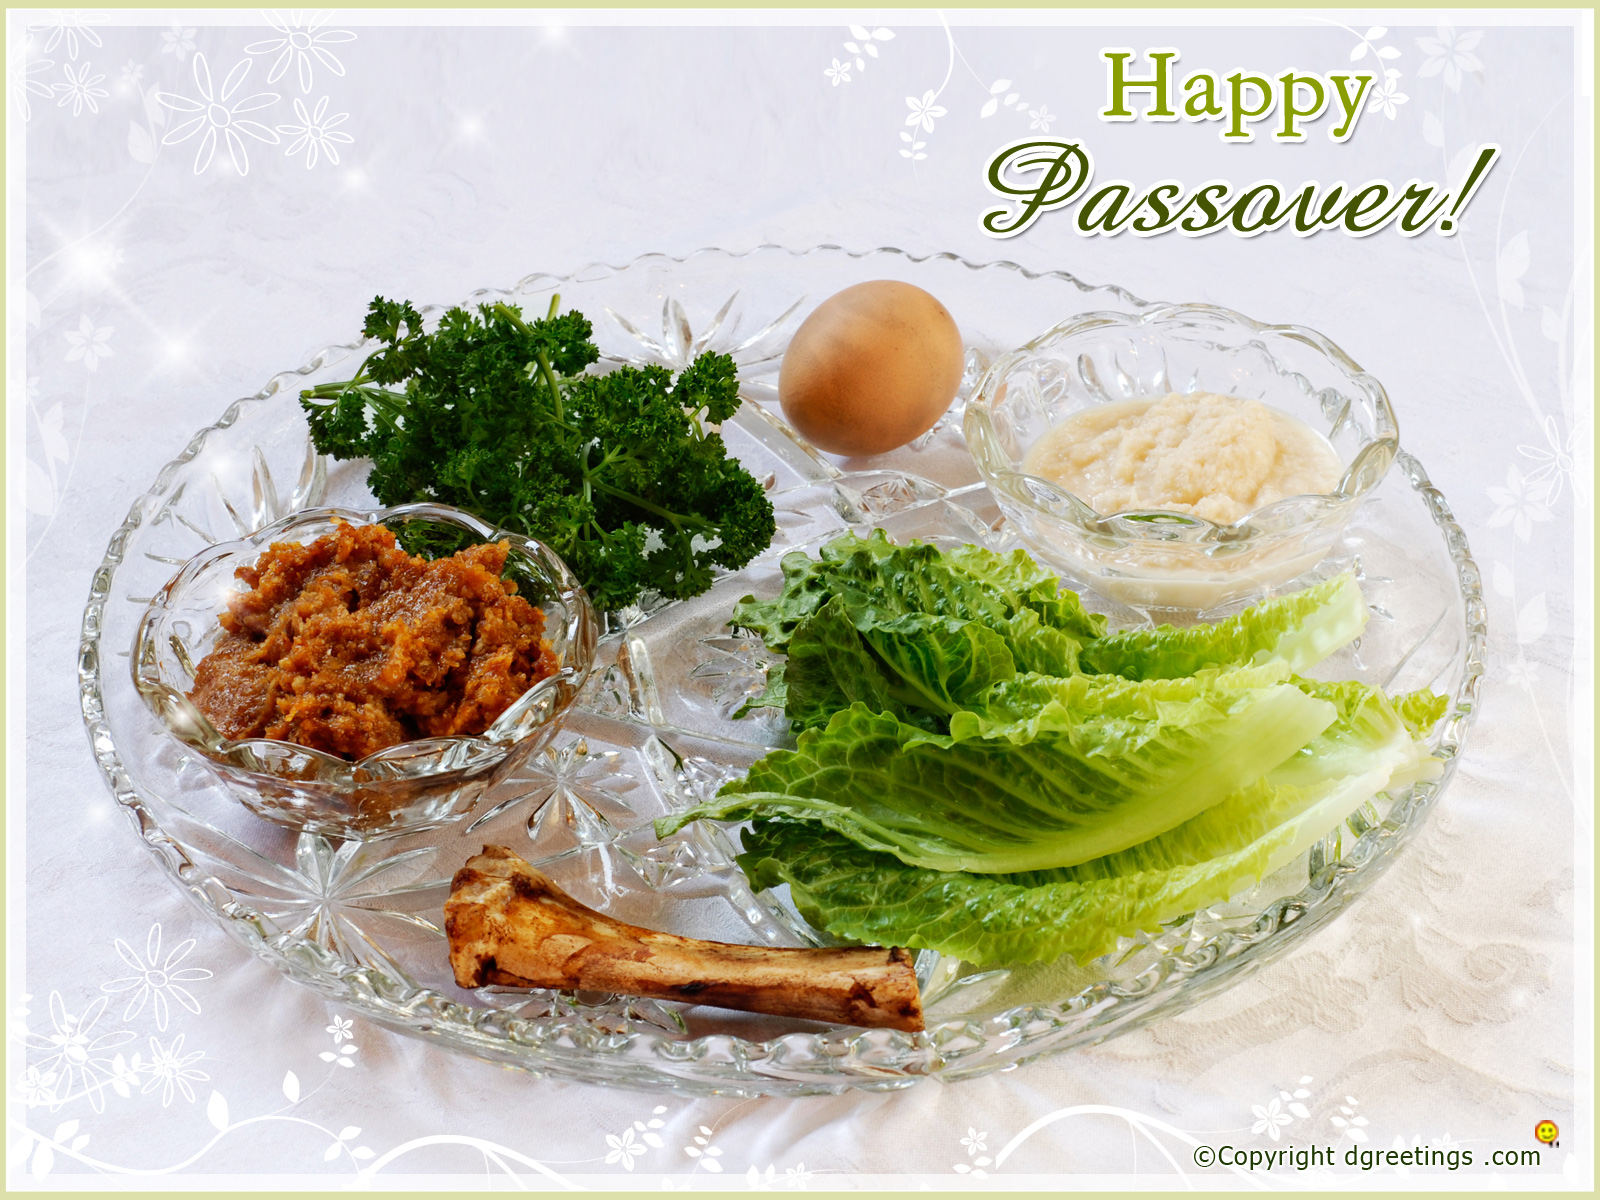 Passover Wallpaper Of Different Sizes Puter